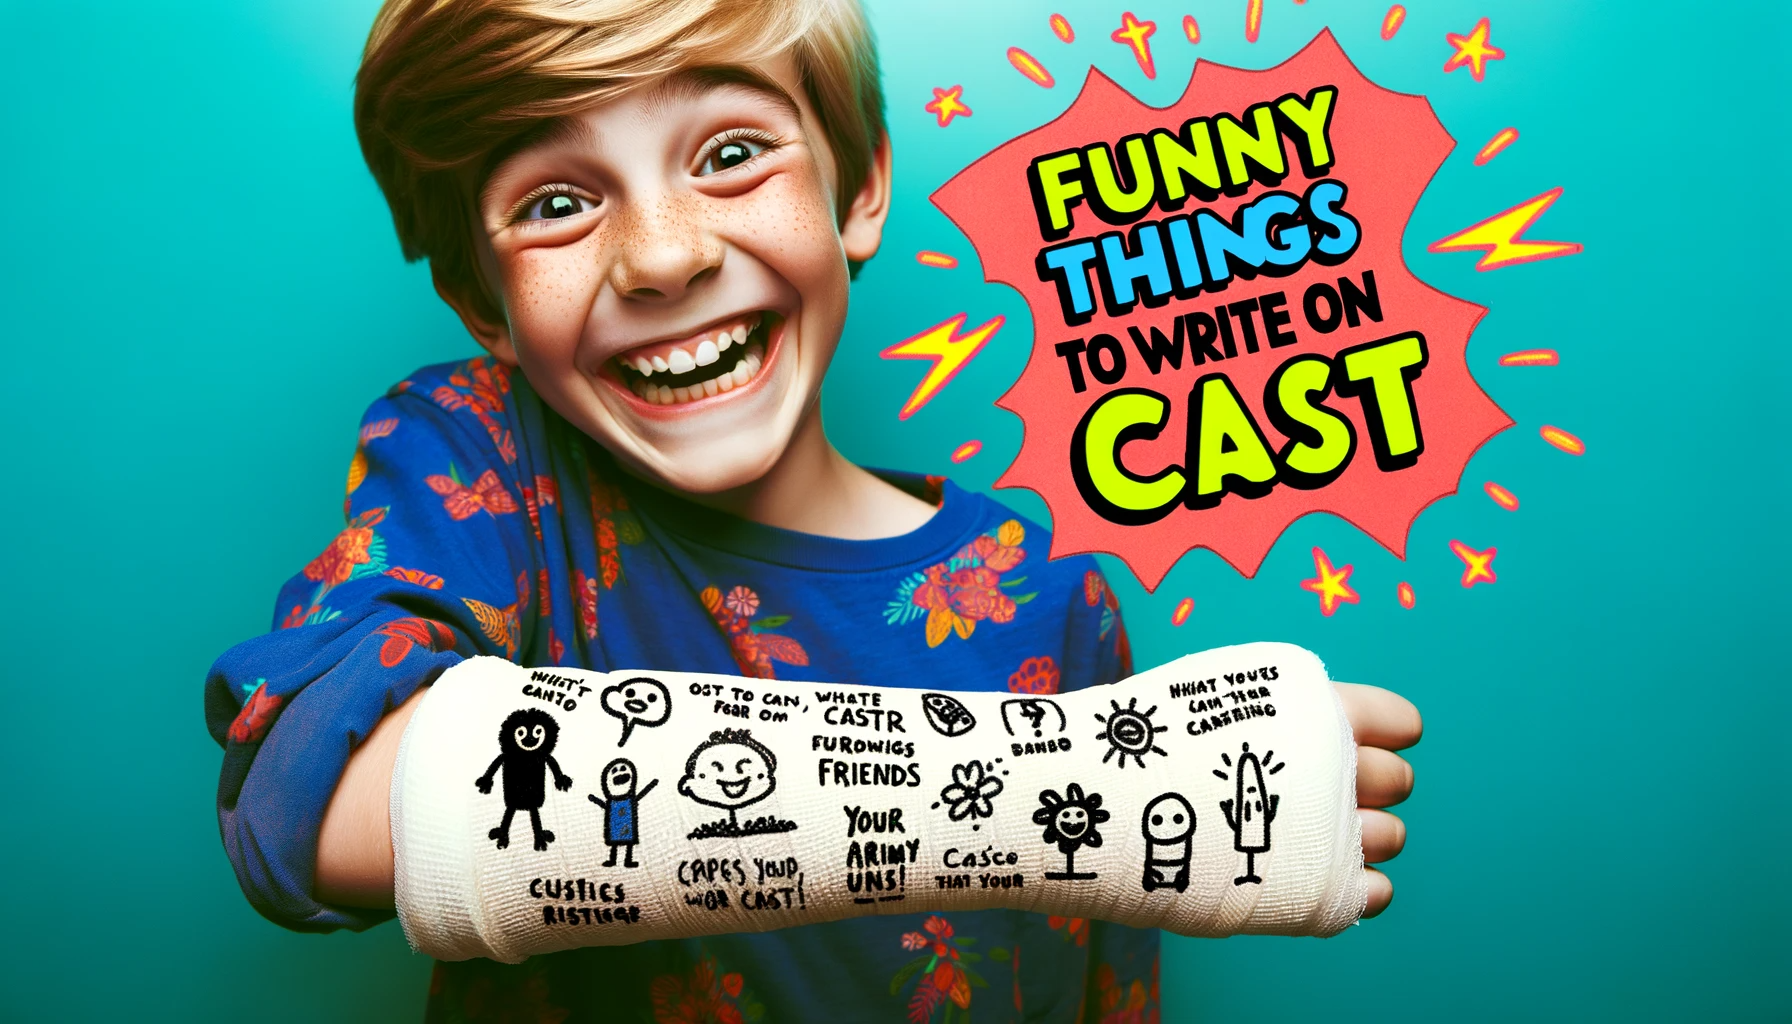 Funny Things to Write on Cast